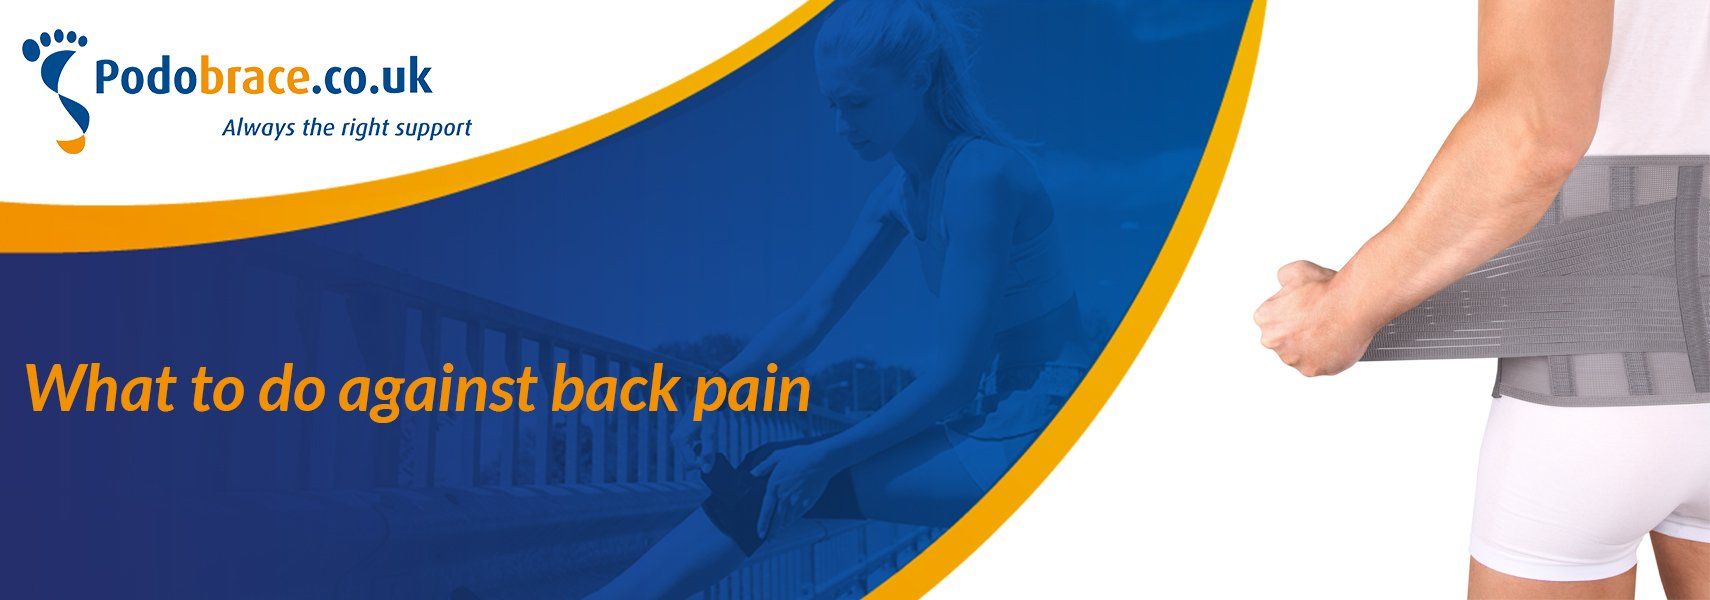 What to do against back pain